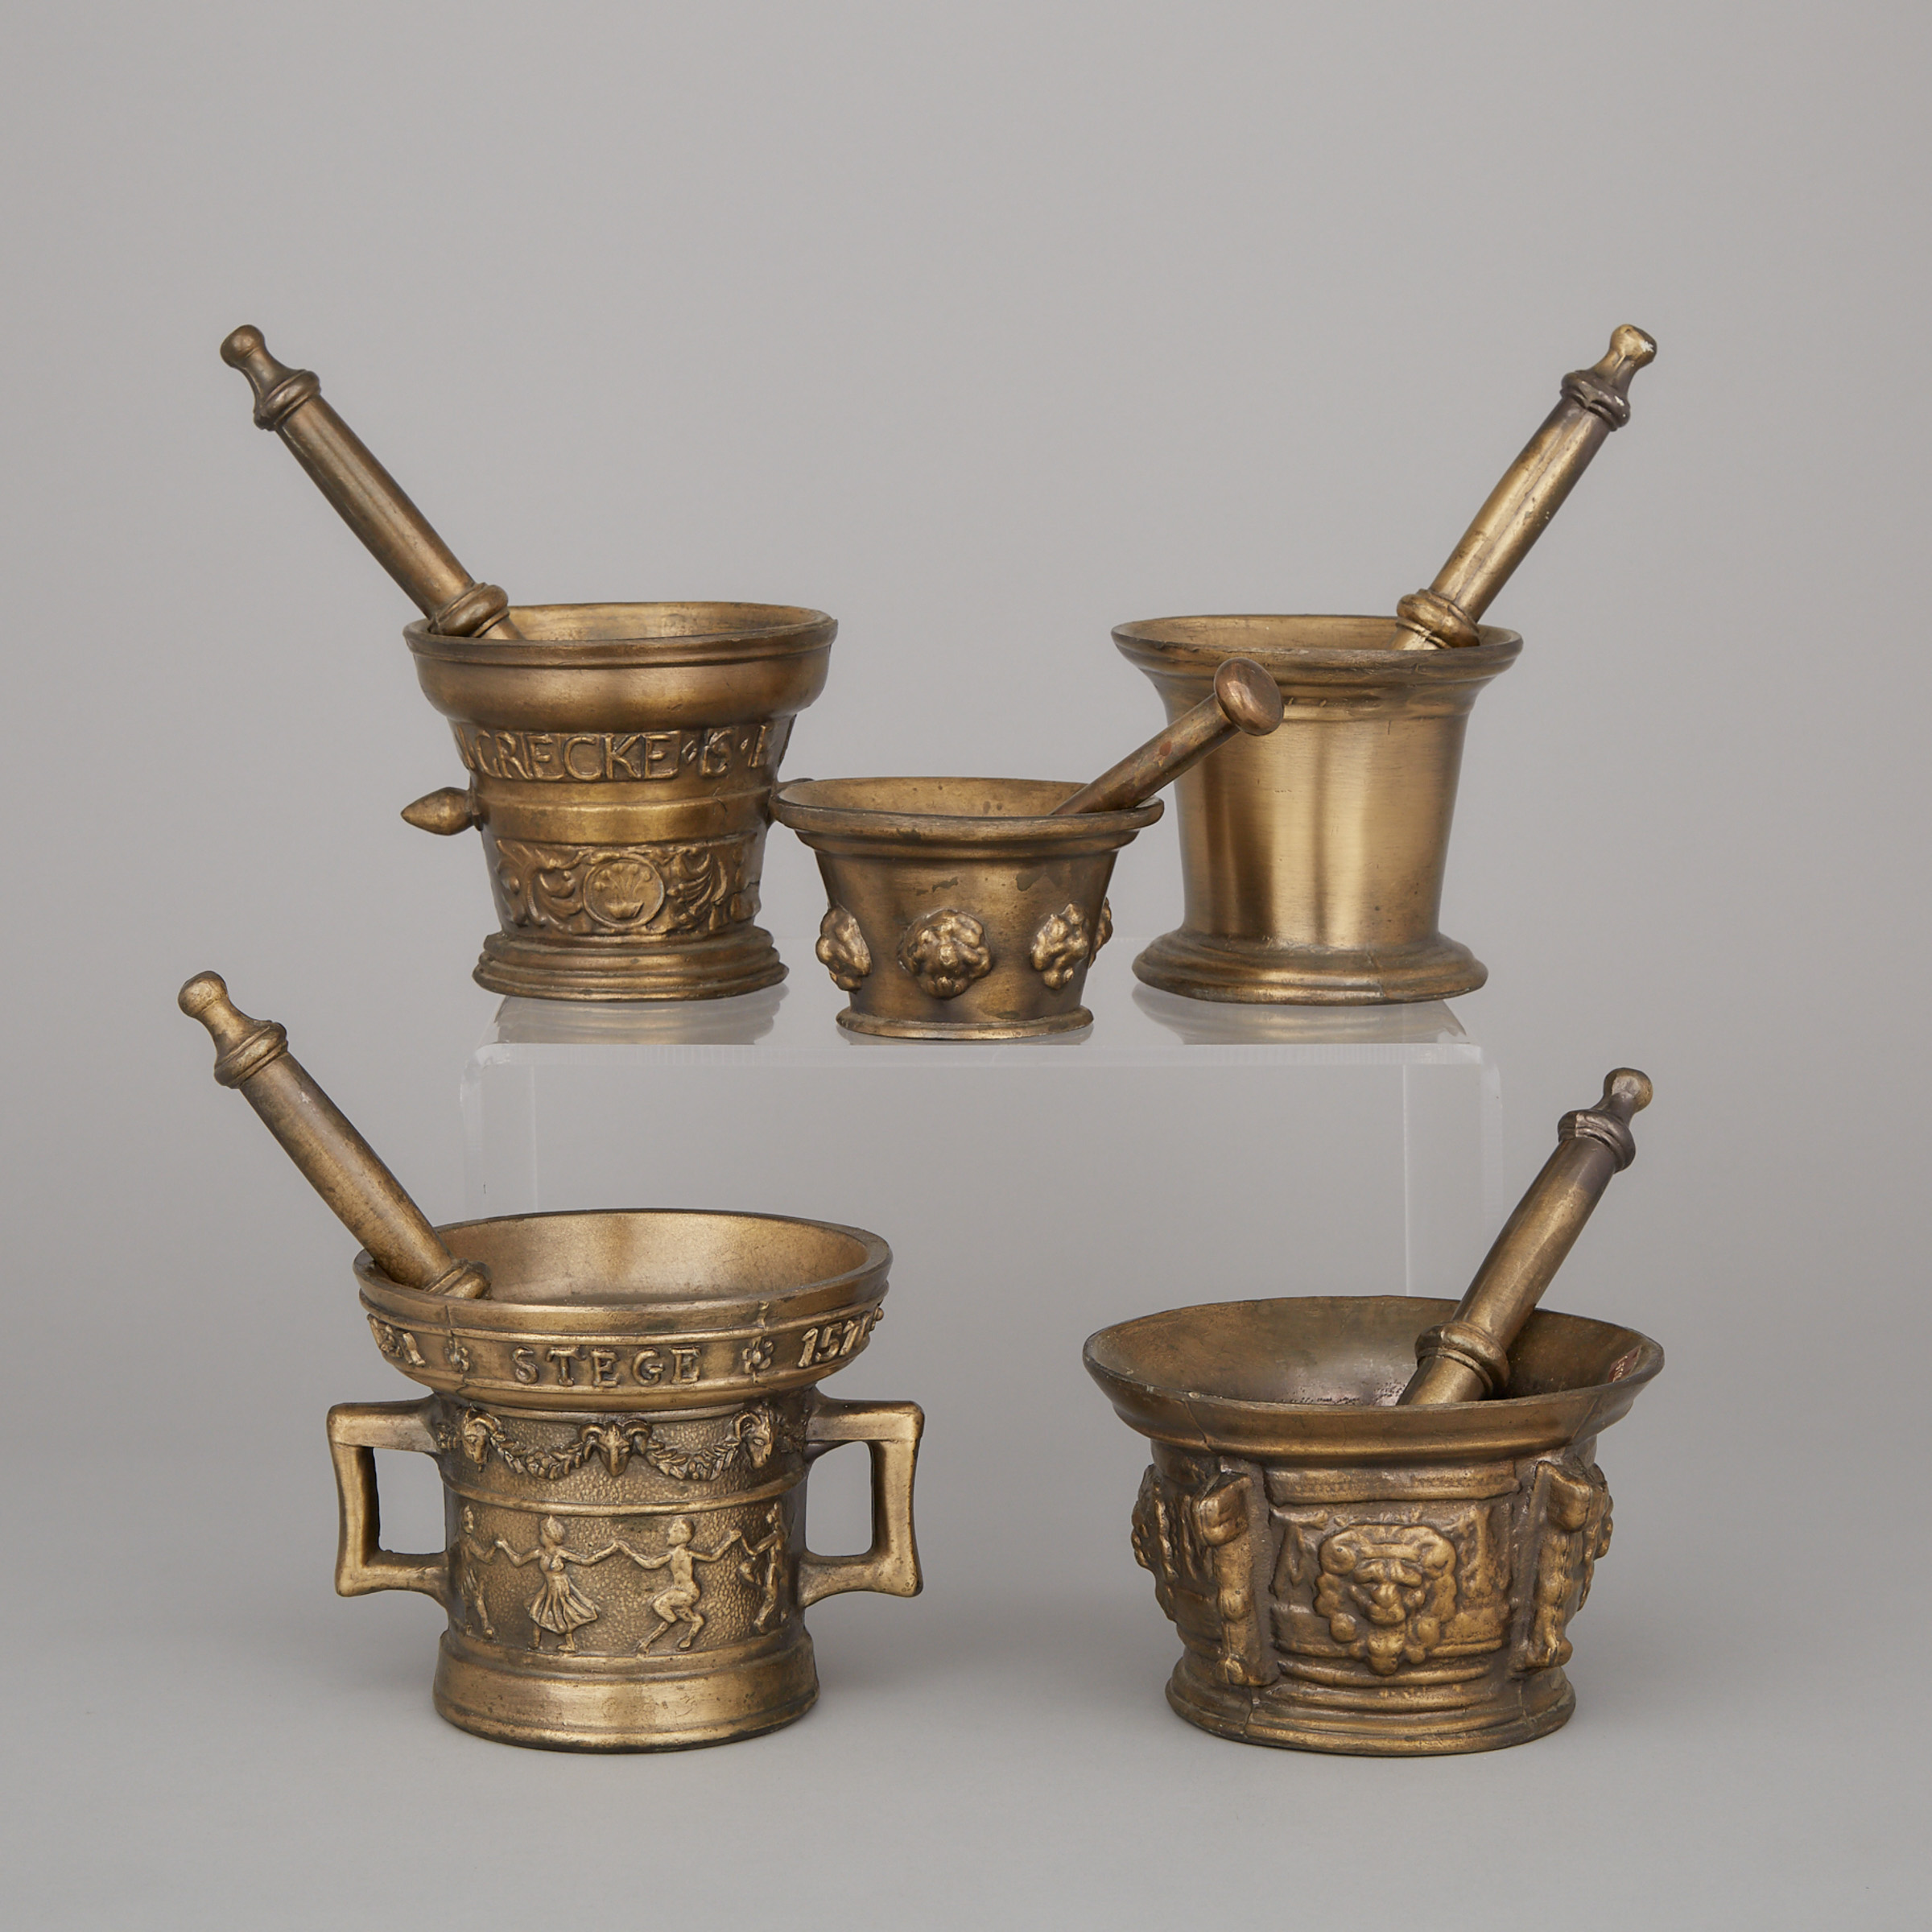 Group of Five Bronzed Metal Mortars and Pestles, mid 20th century